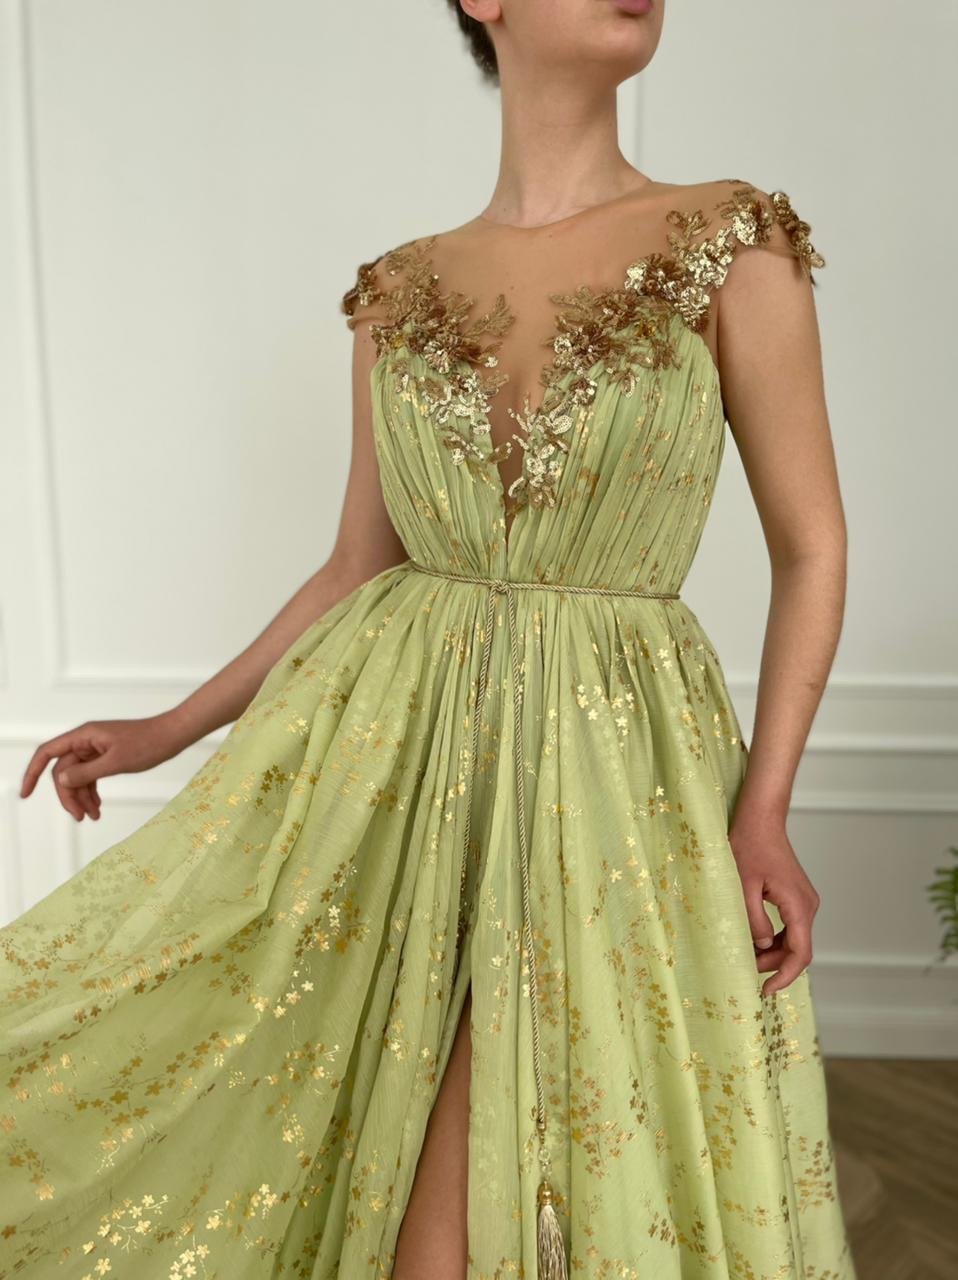 Green A-Line dress with cap sleeves, v-neck and embroidery